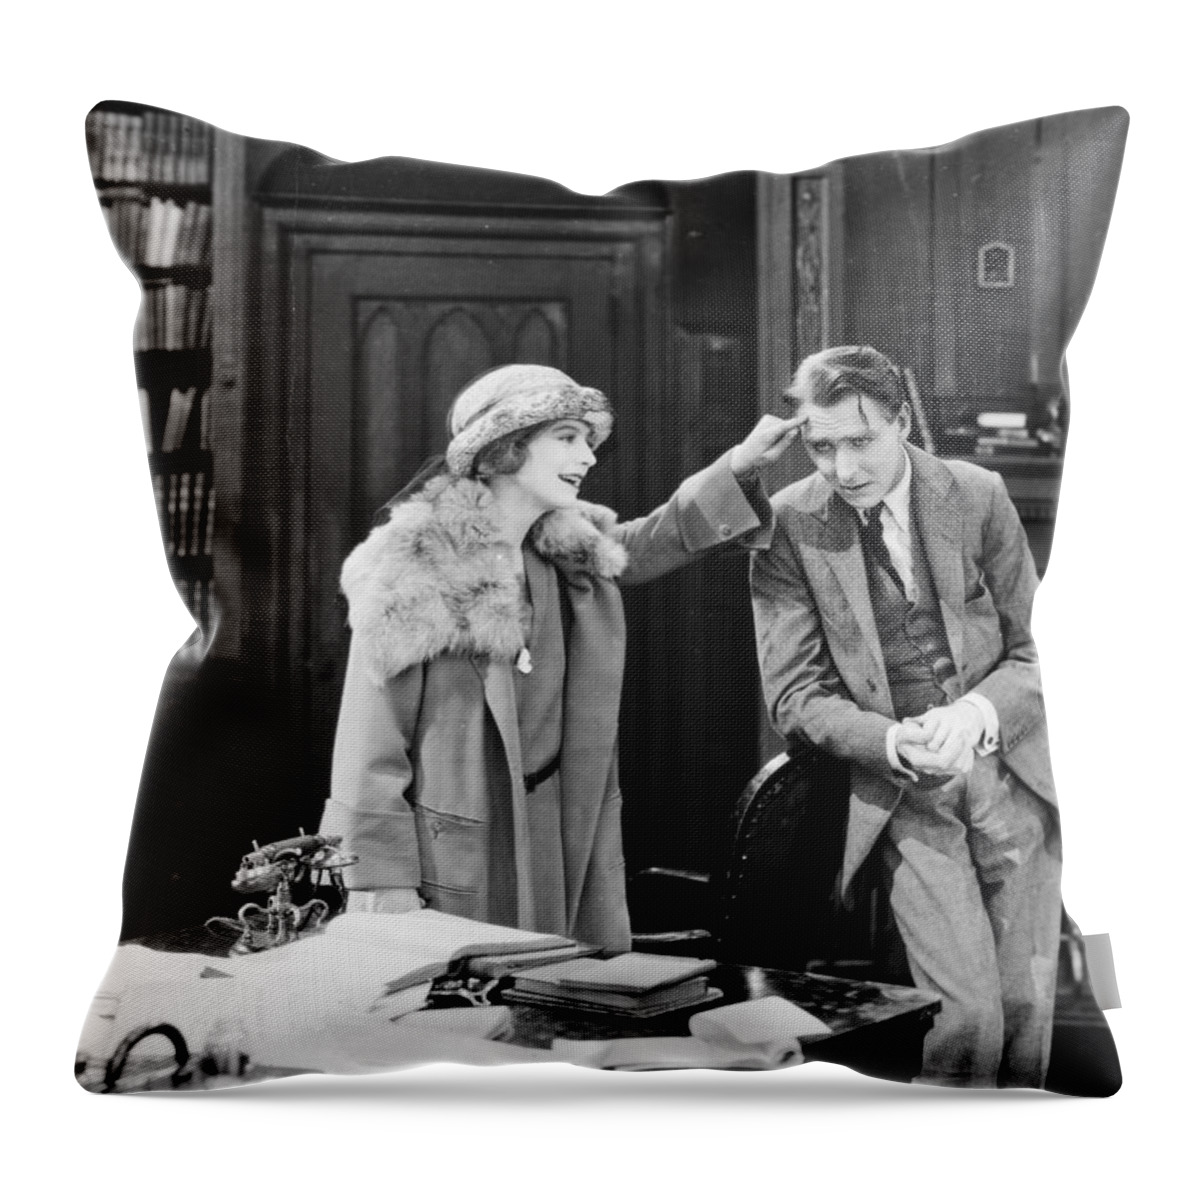 -offices- Throw Pillow featuring the photograph Silent Film Still: Offices #37 by Granger